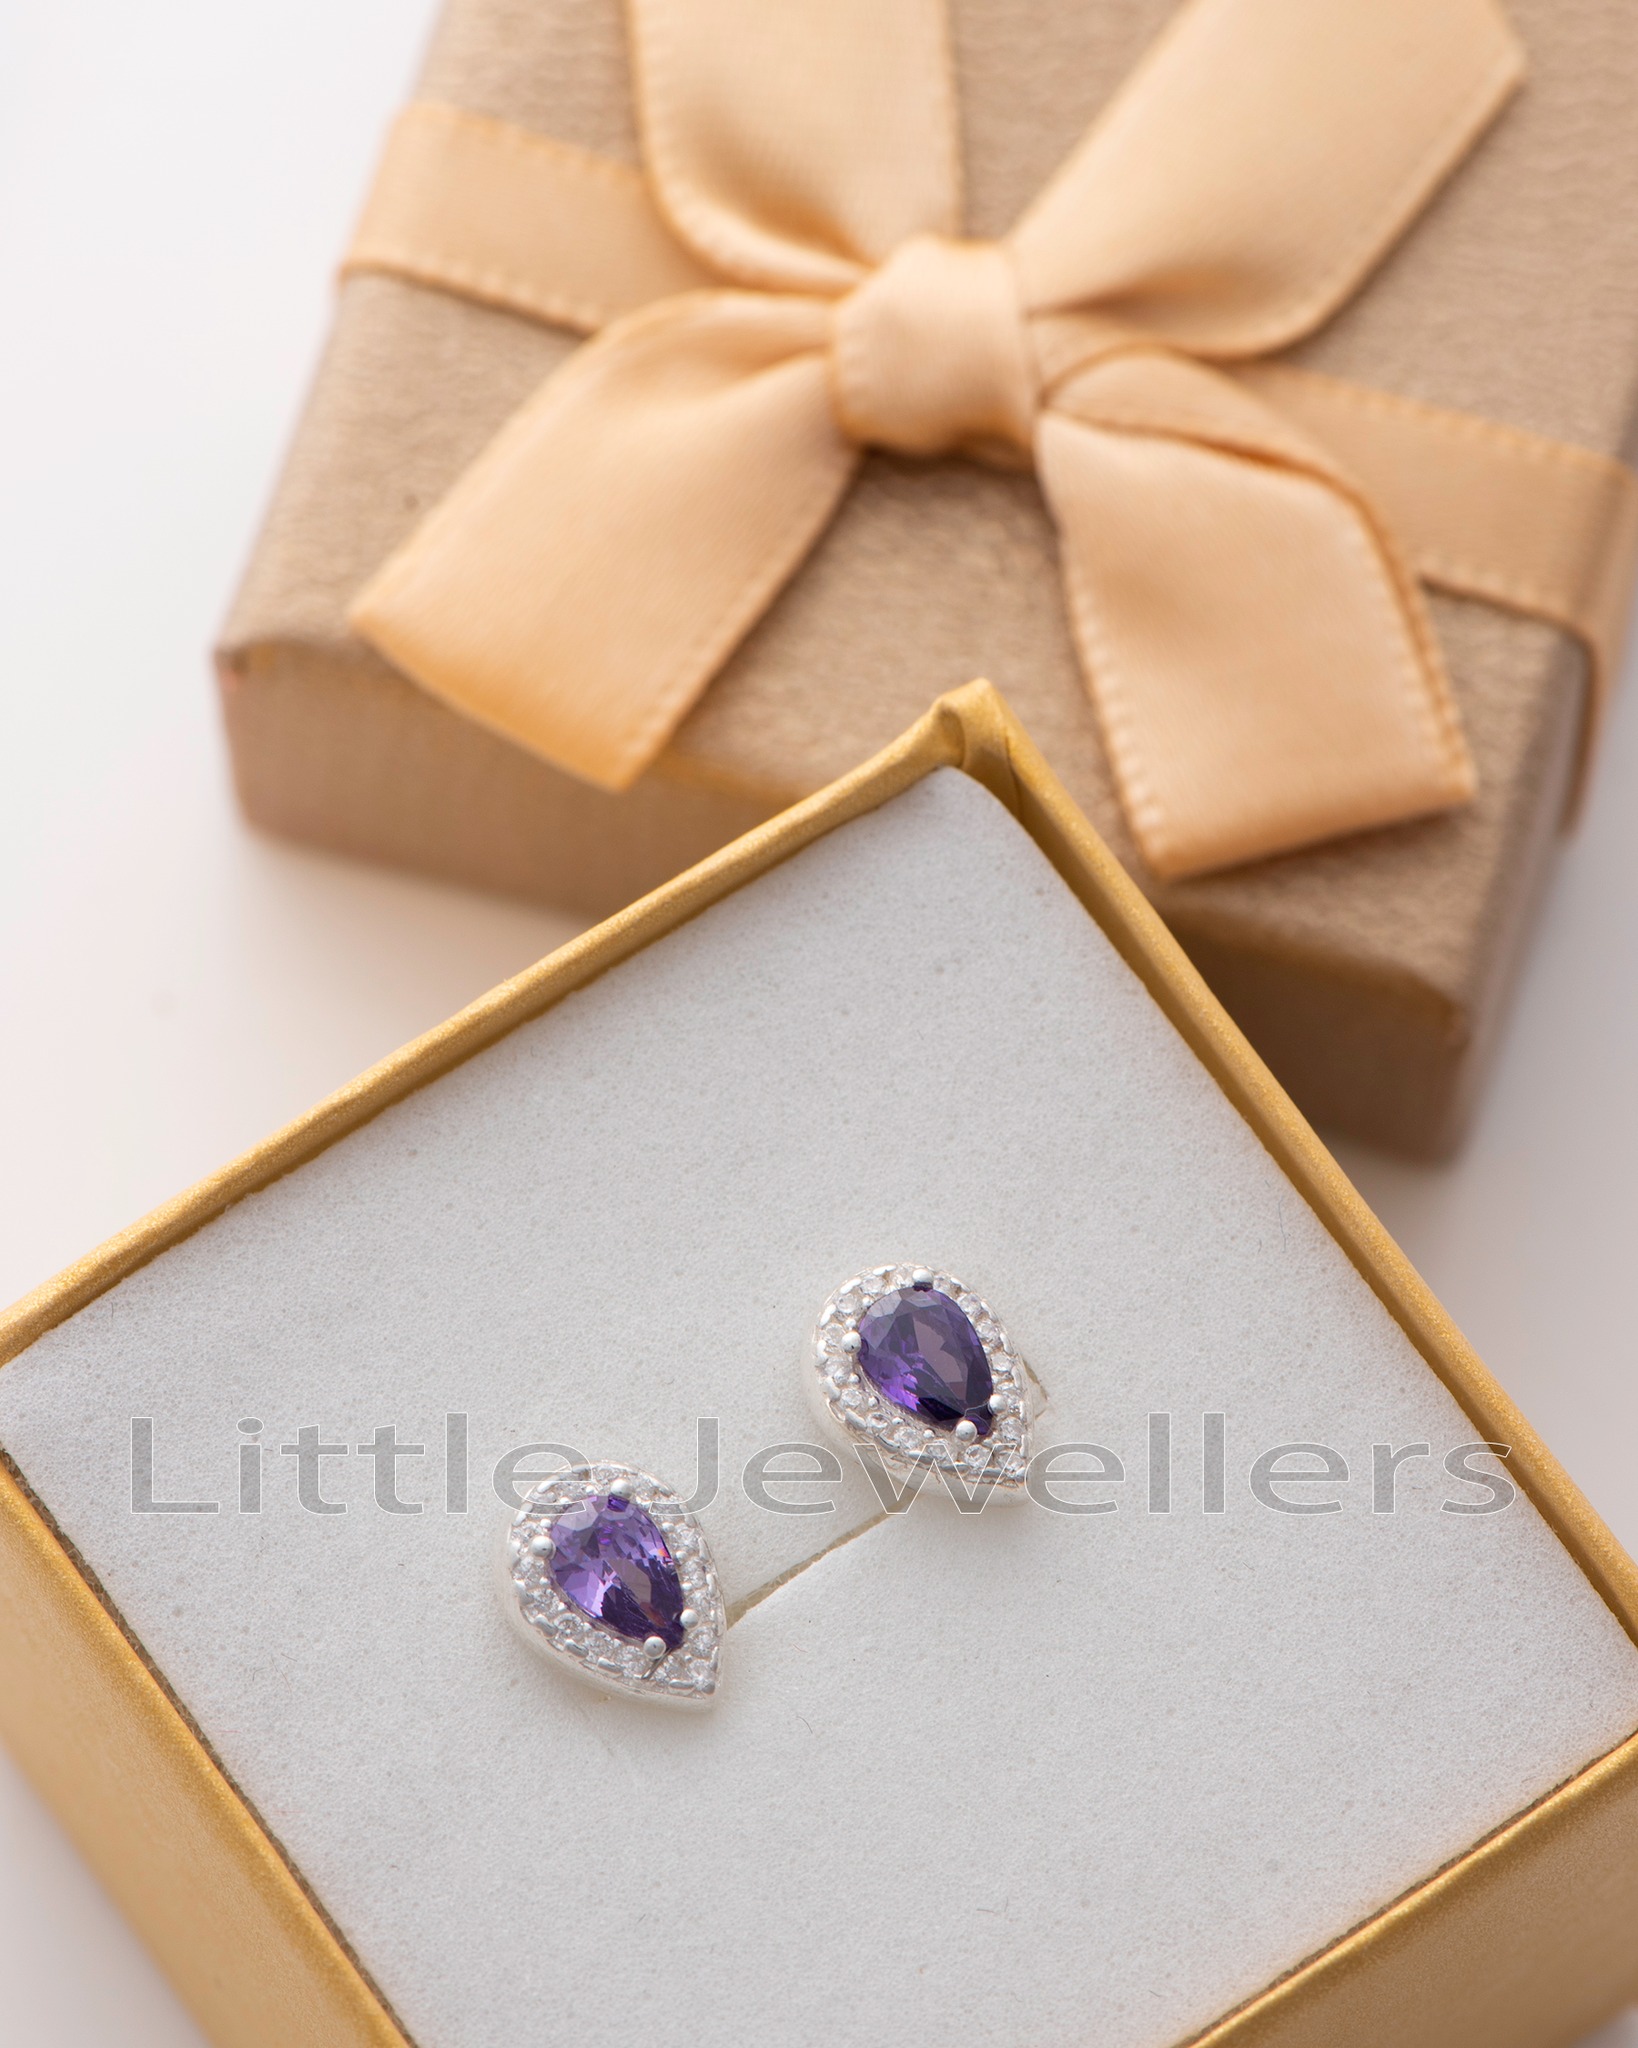 Shop beautiful sterling silver stud earrings with clear & amethyst zirconia stones. Find your perfect pair in Nairobi - timeless style & elegance for any occasion.